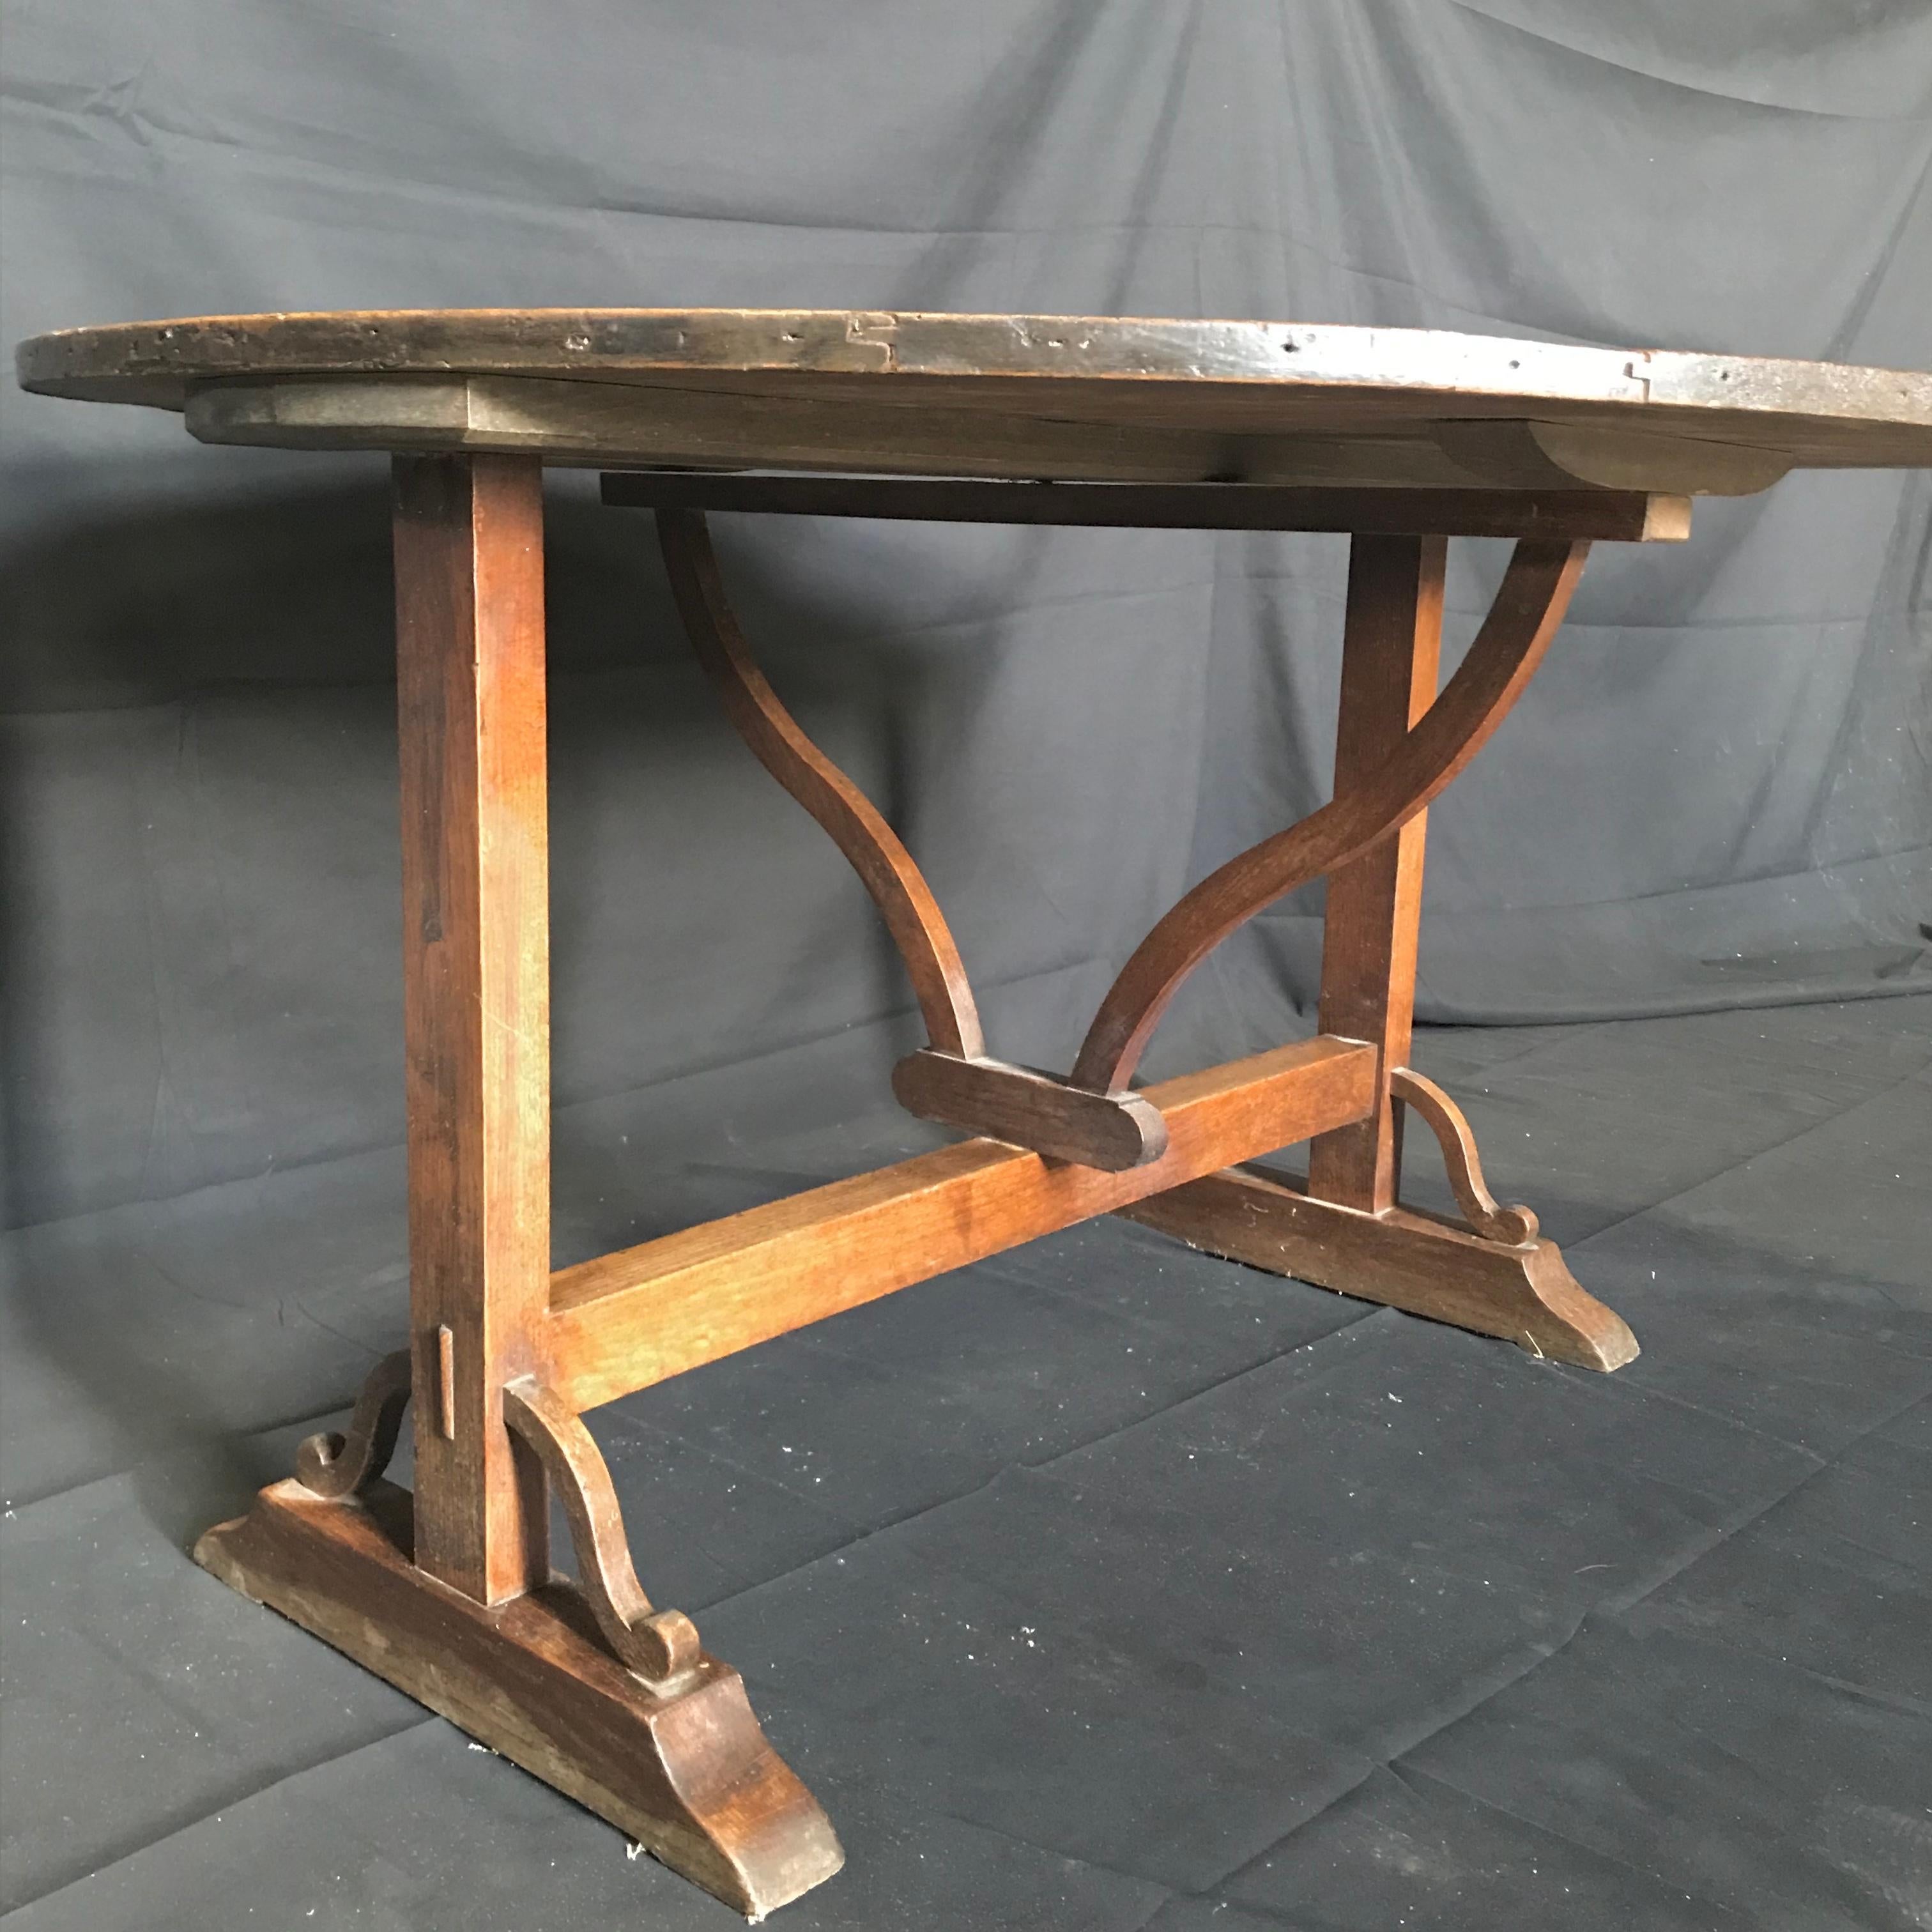 French wine tasting table, also known as a vendage or vigeron table, which was once used in the vineyards of France for tasting wine or enjoying a meal. This table would be suitable for use in a breakfast area or wine cellar. Featuring a tilt-top,